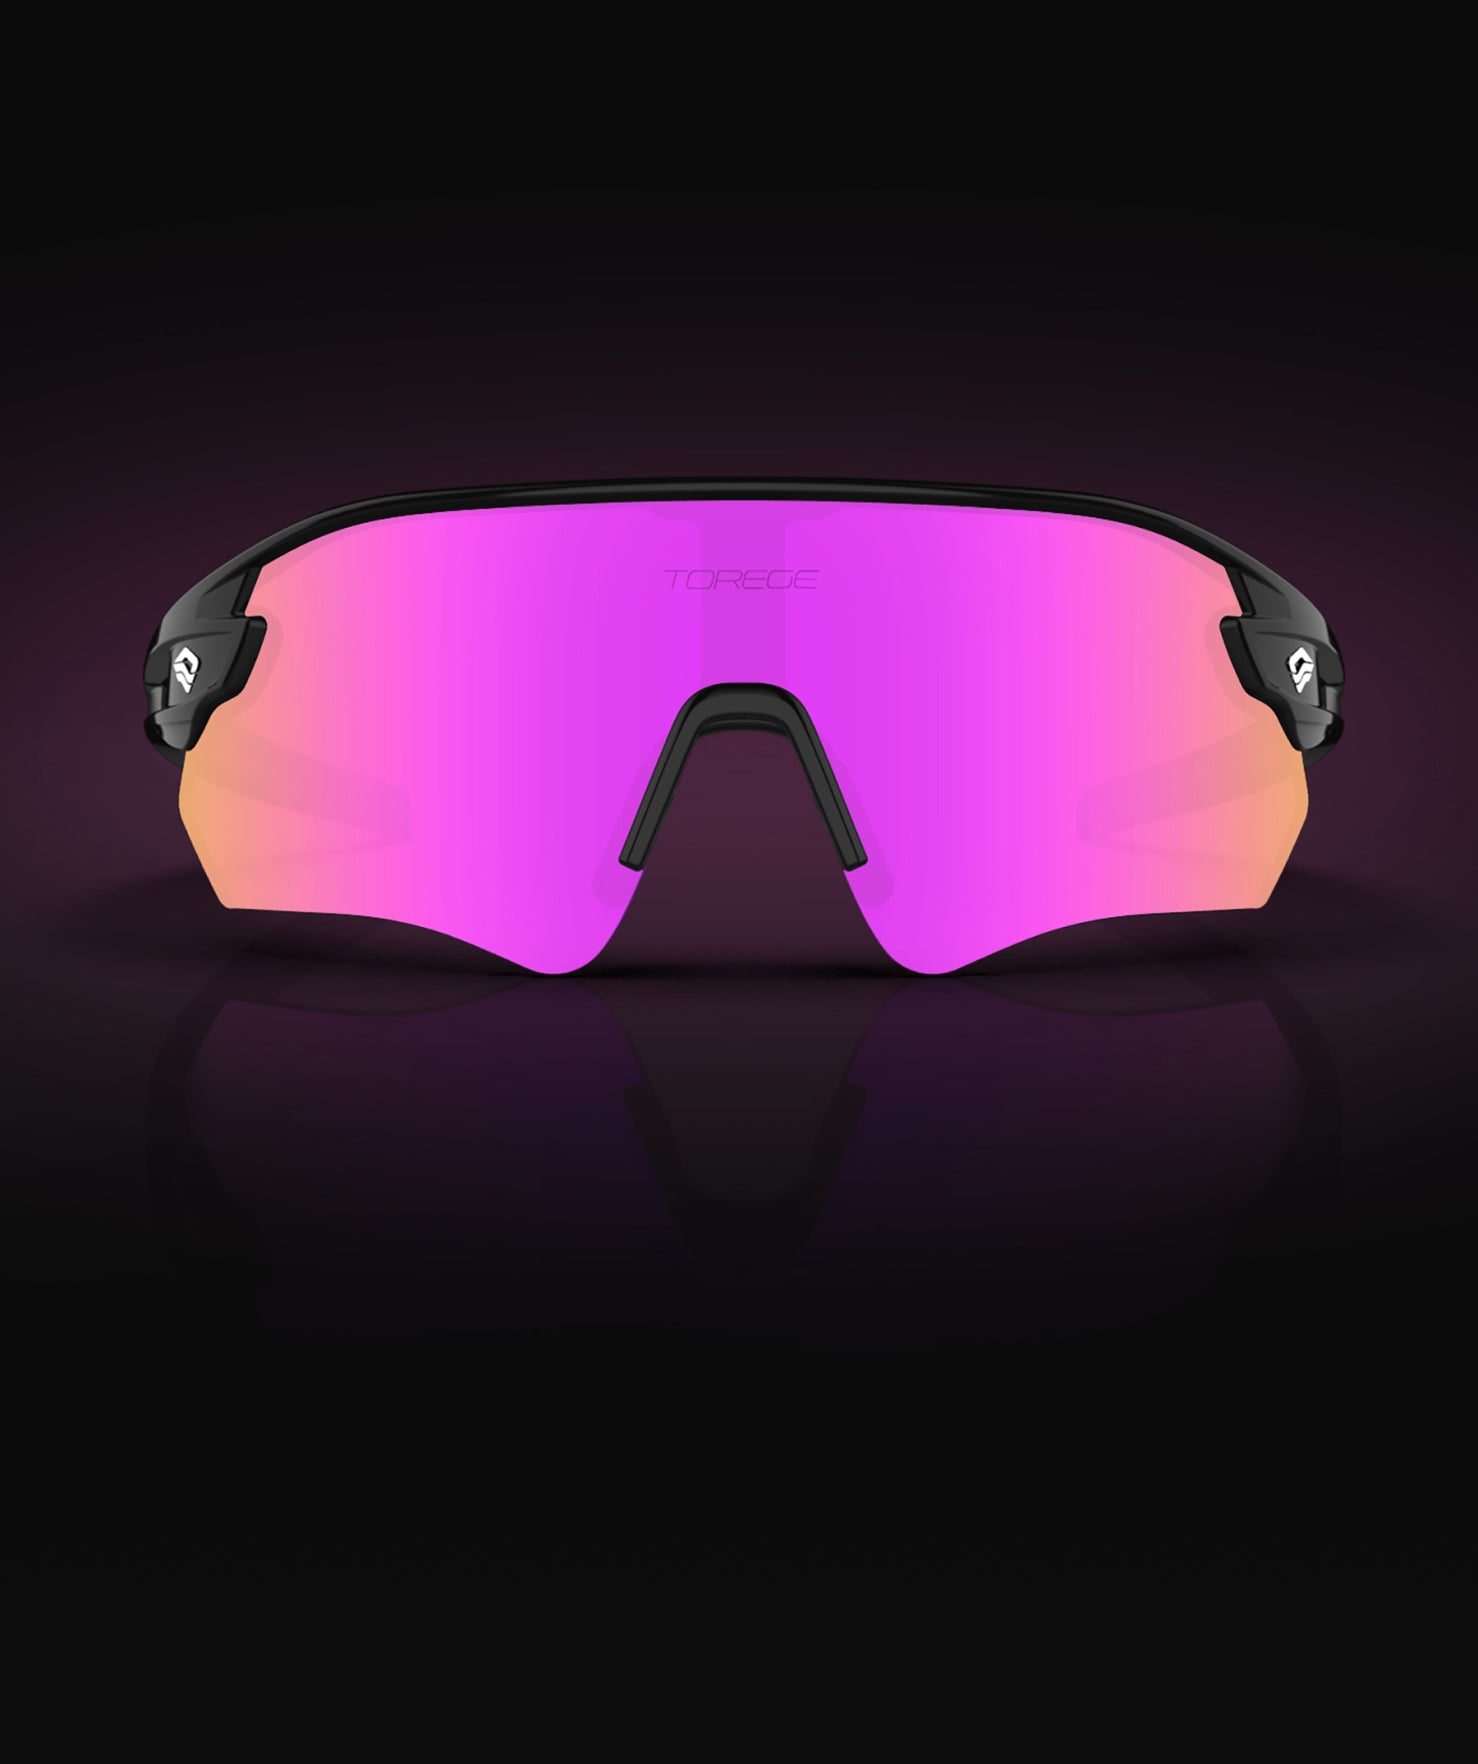 Cyclone Latest Sunglasses For Men For Men And Women Anti